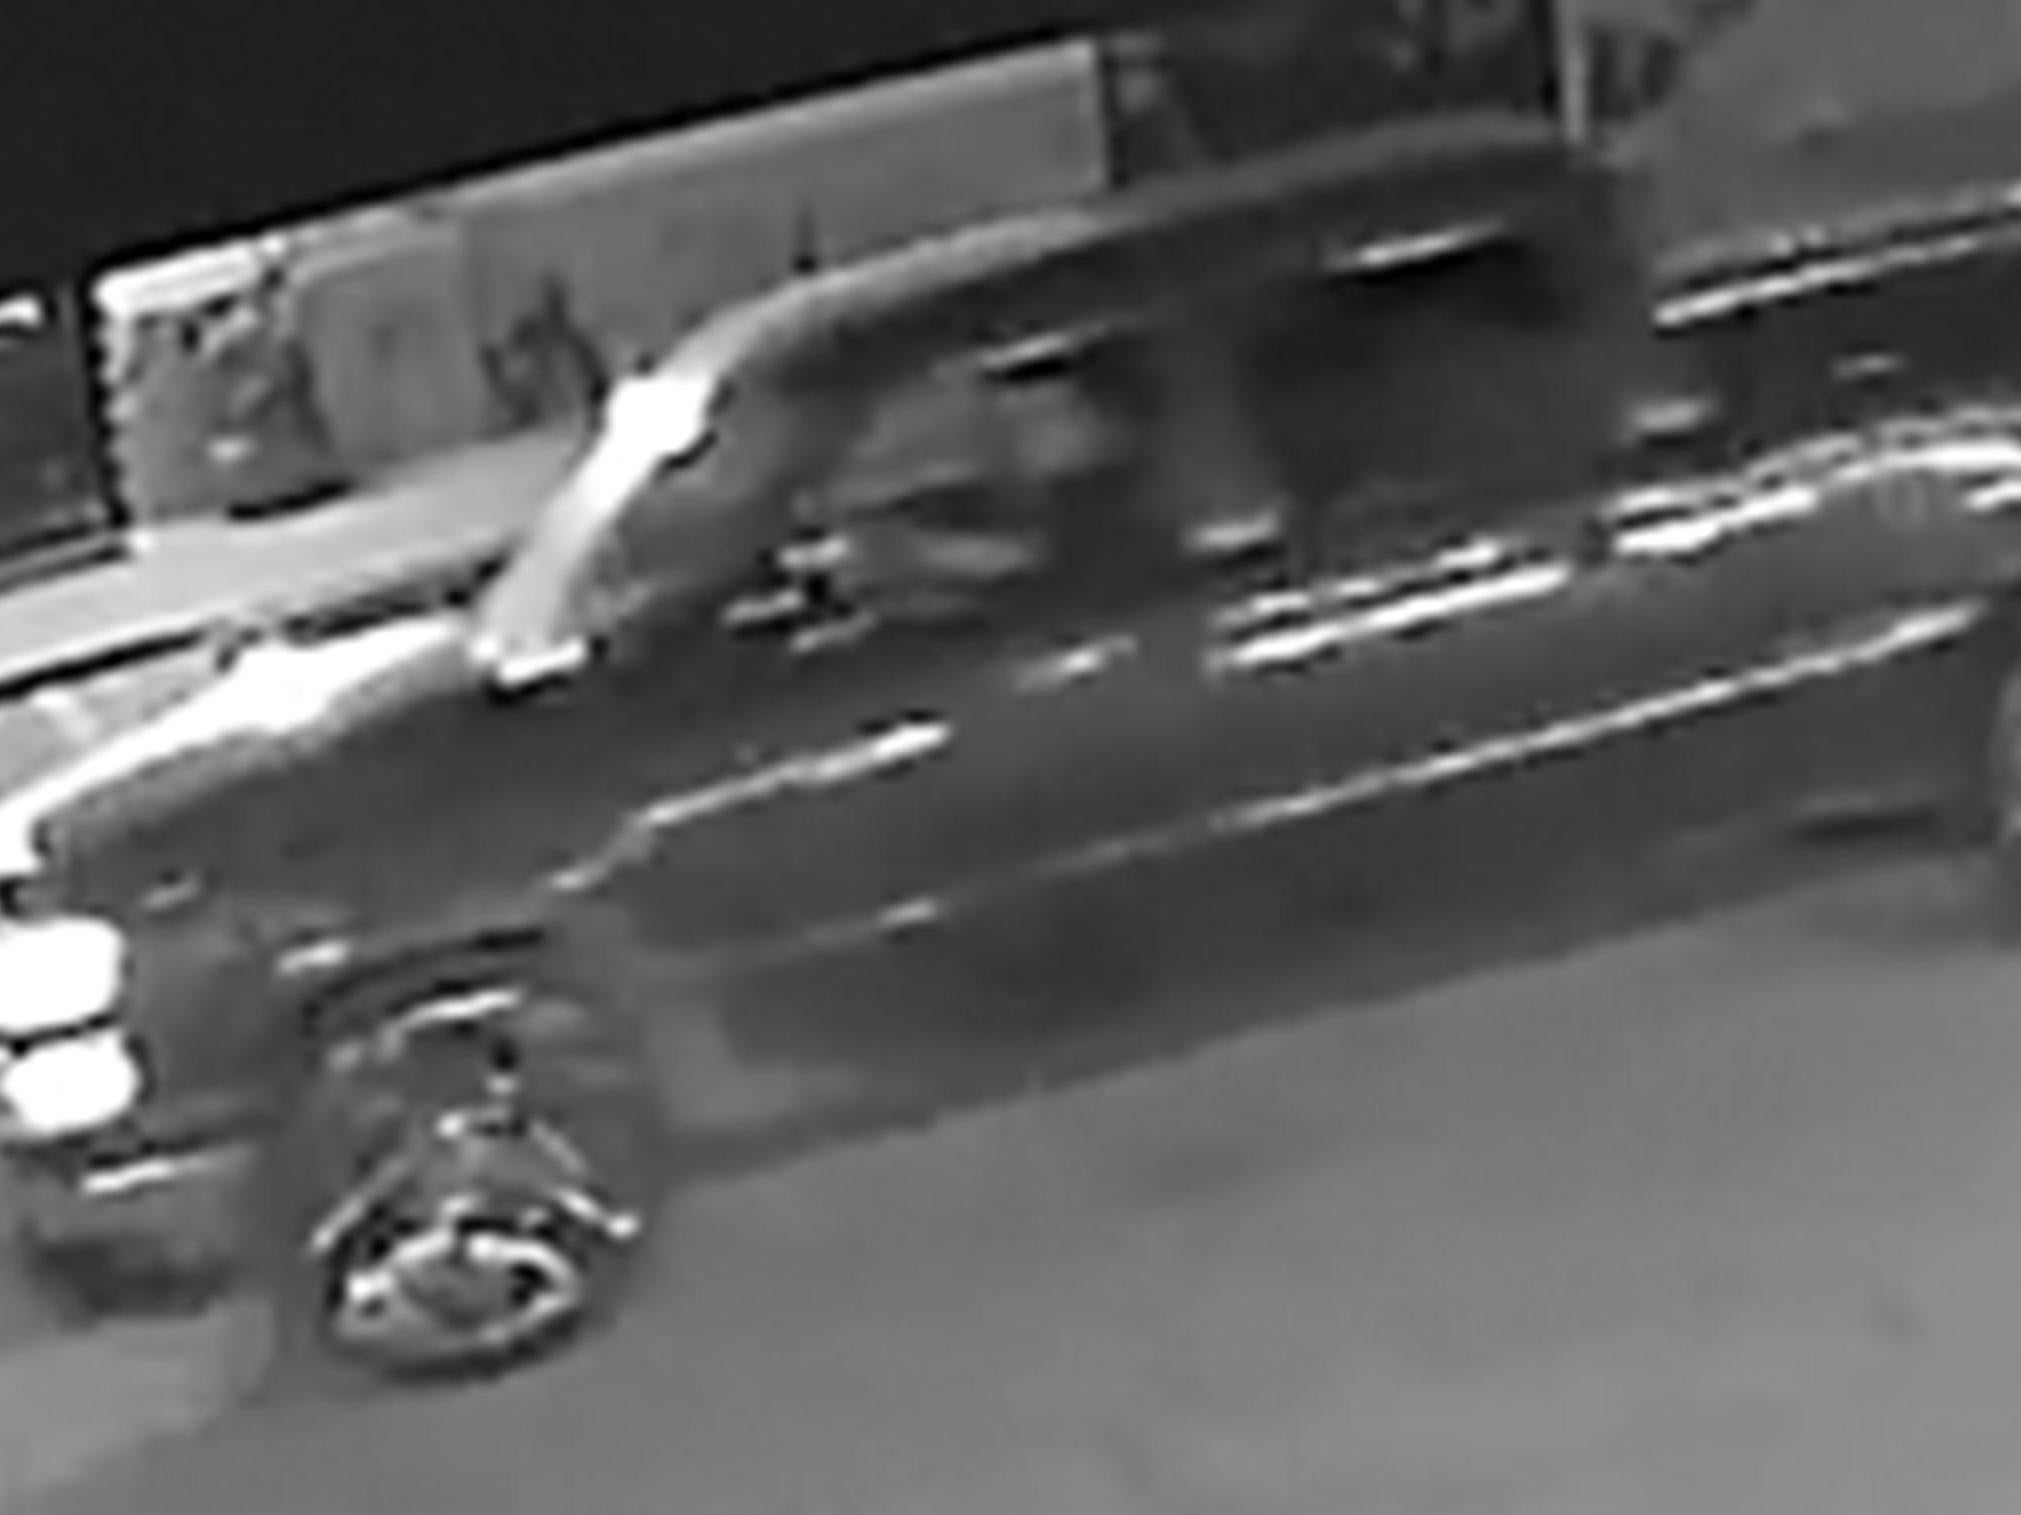 The suspect, a Latin male, was caught on CCTV driving a red Chevrolet truck